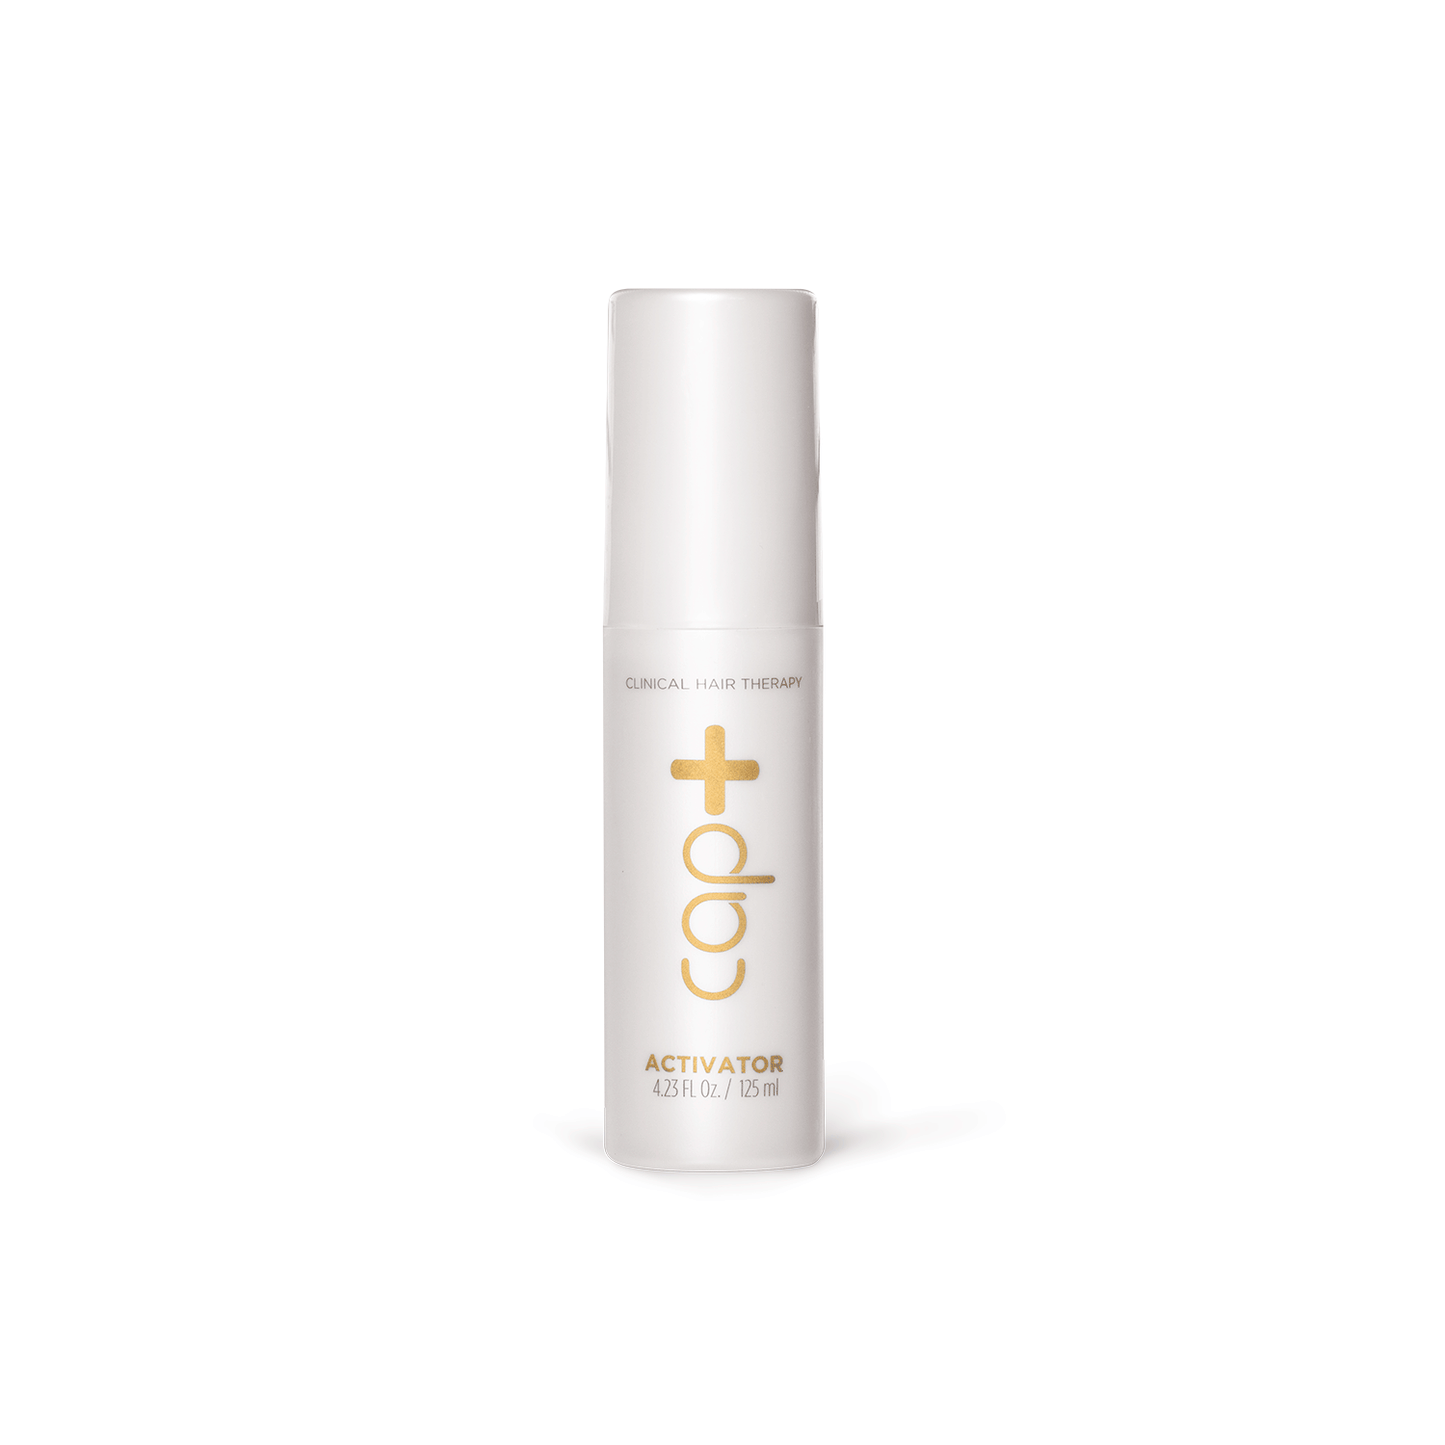 CAP+ Clinical Hair Therapy - Activator